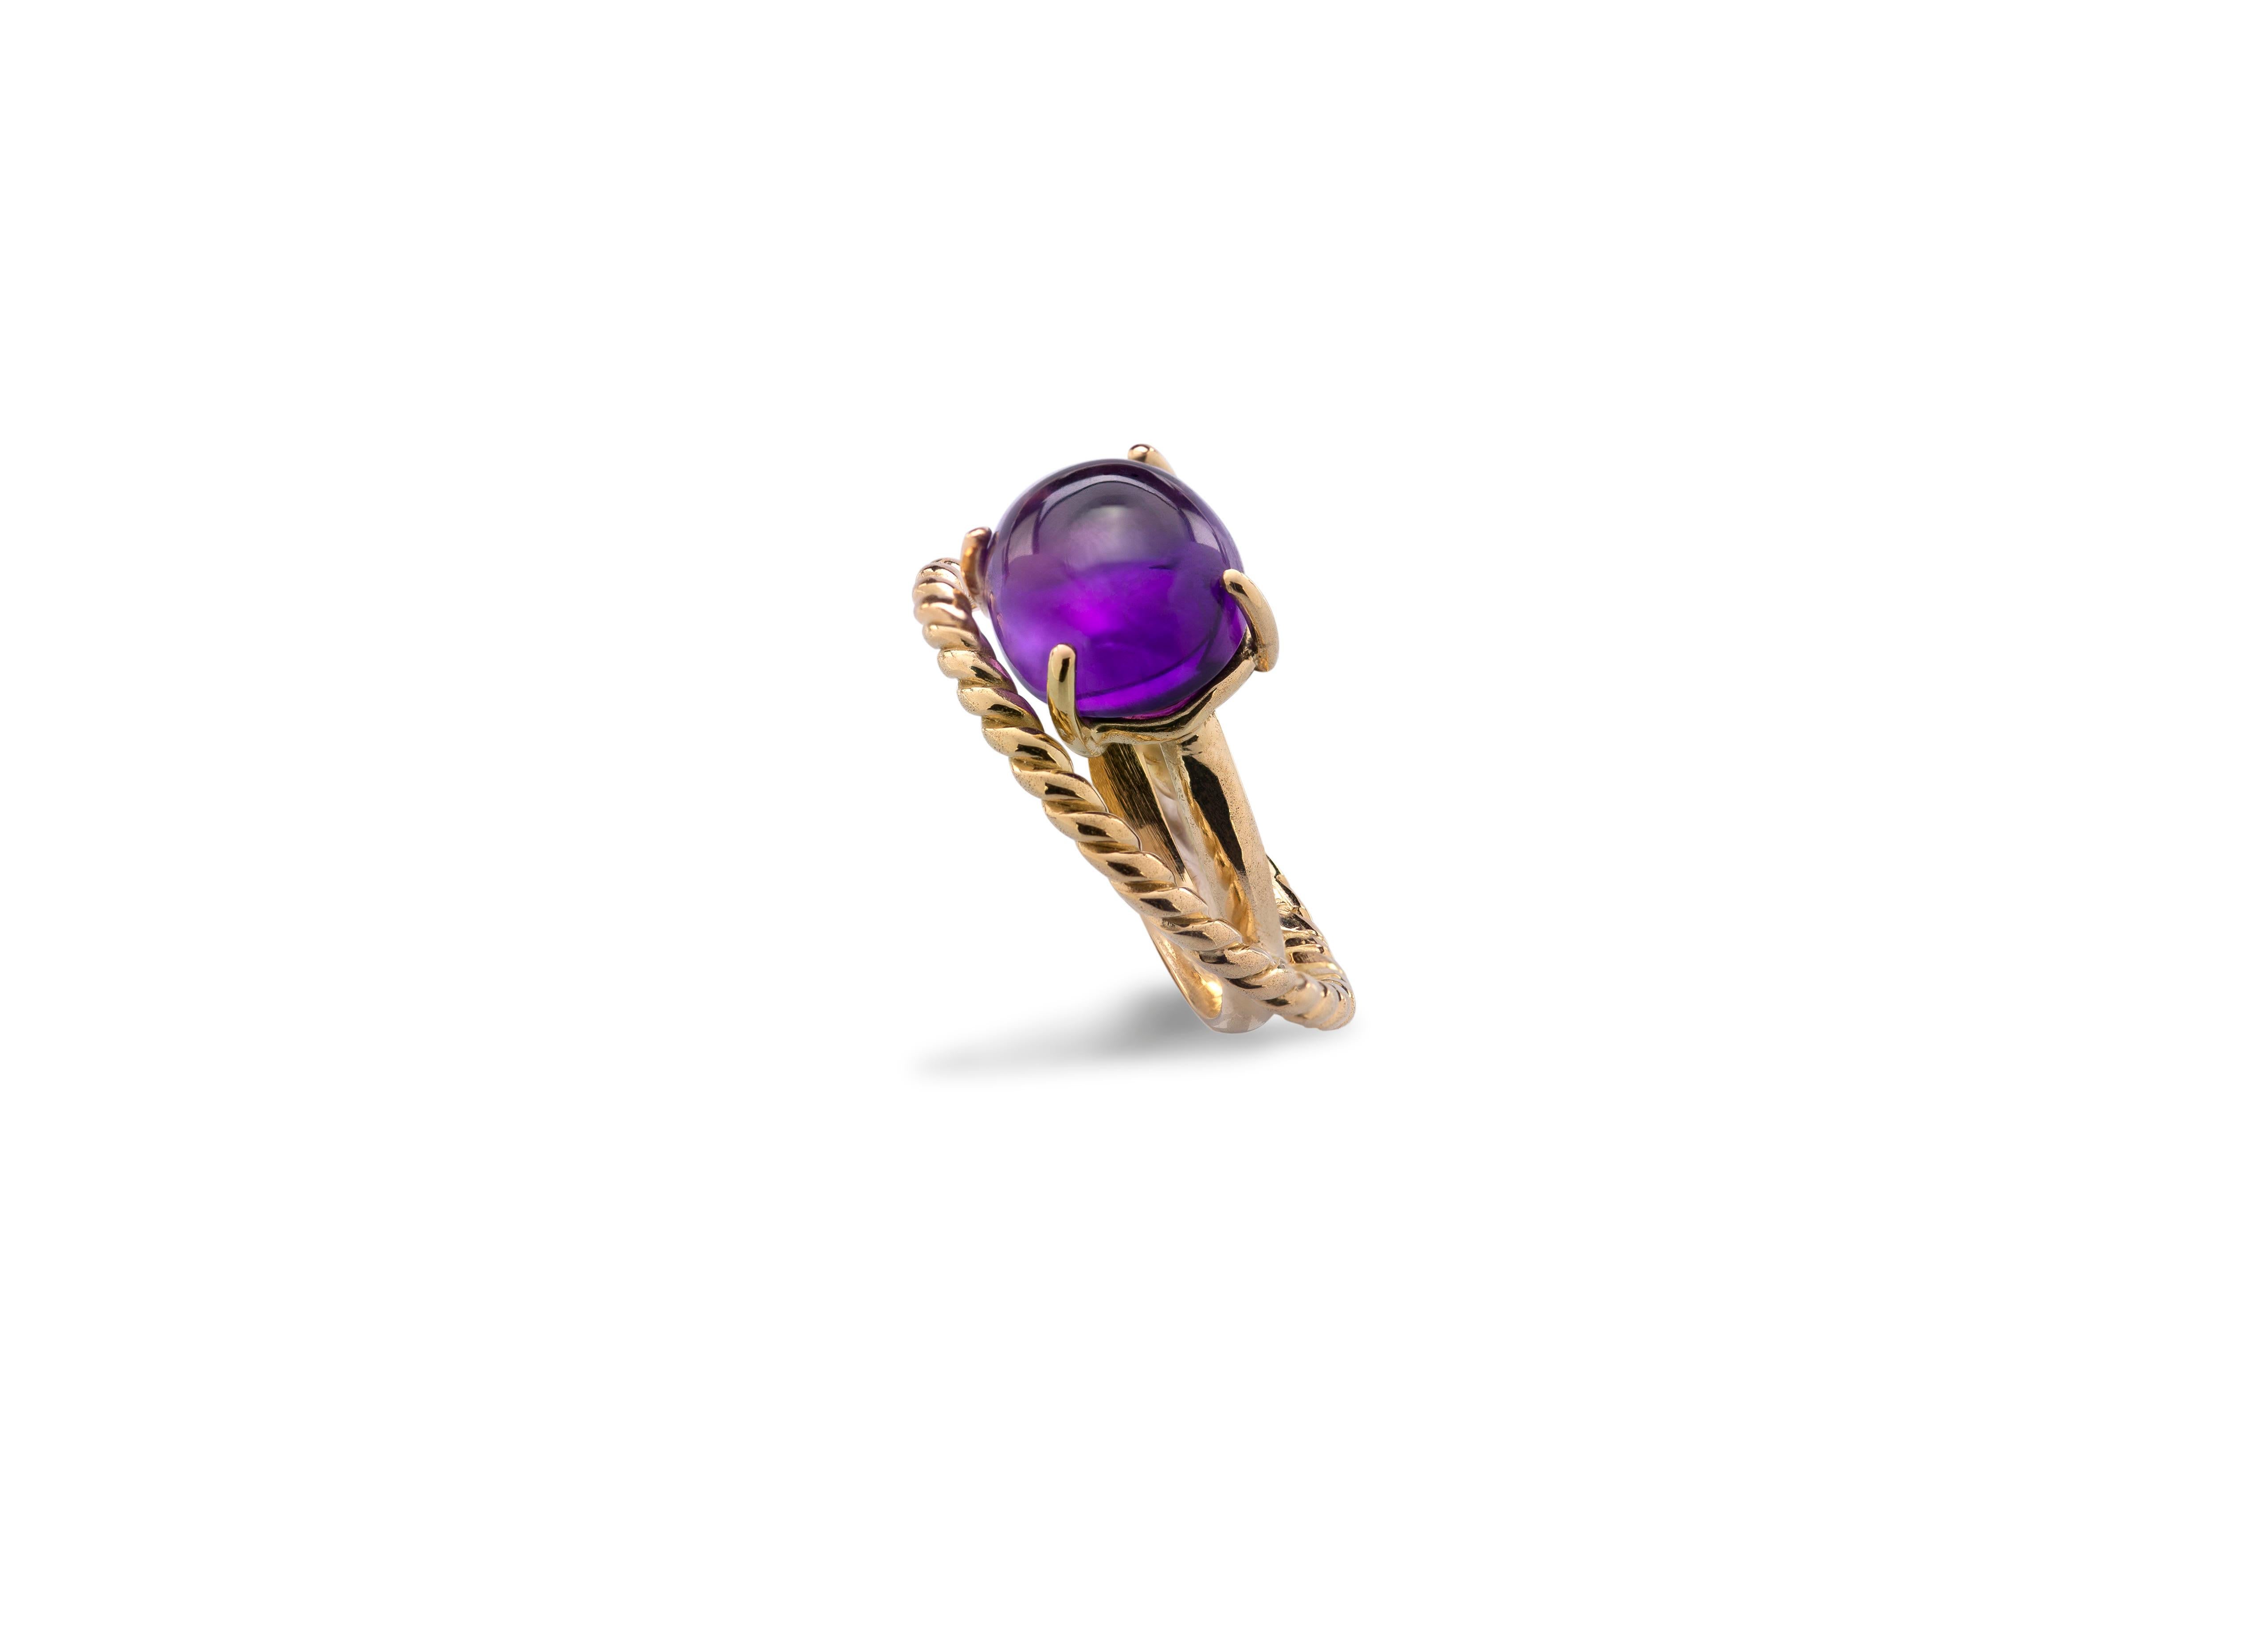 Modern 18 Karat Yellow Gold Twist Love Amethyst Handcrafted Design Ring.
This ring is handcrafted with two strips intertwined together in 18 karats yellow gold. 
A modern style design ring with an oval cabochon amethyst . 
Inspired by the union of